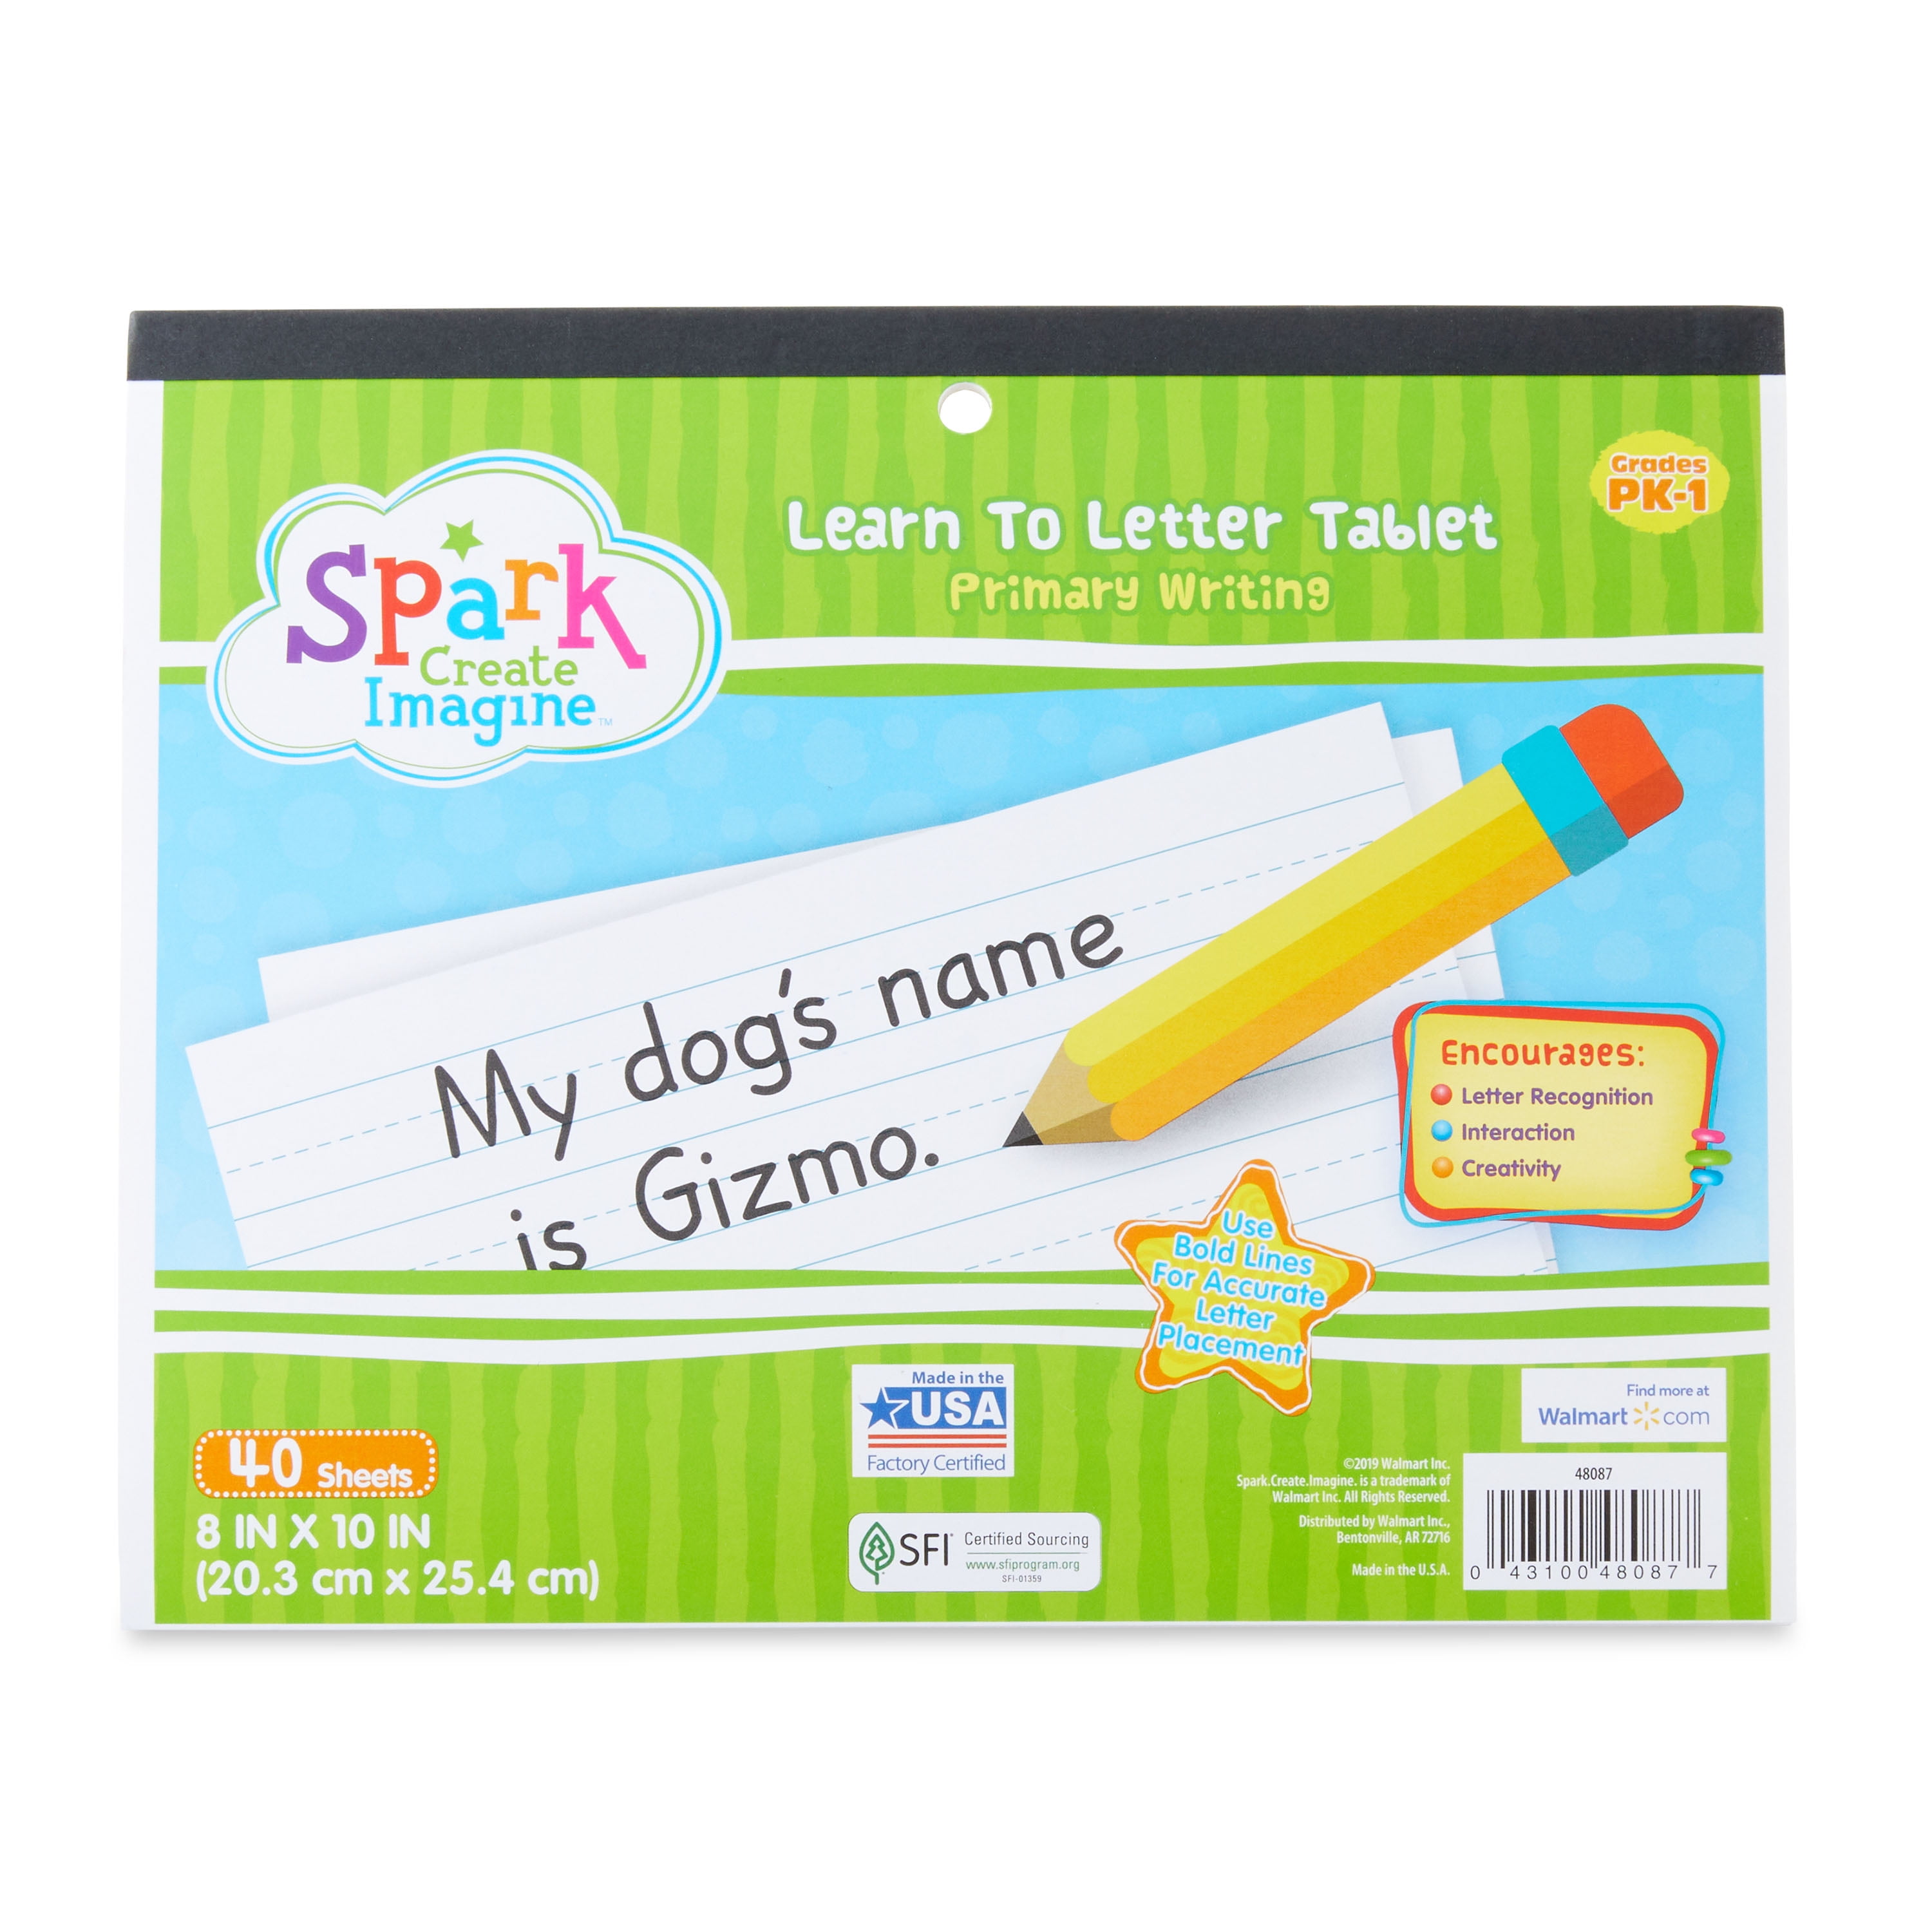 Handwriting Practice Paper: ABC Tracing Paper 8.5x11 for Easy Peasy Cursive  Workbook. Lined Paper for Toddlers, Preschool (Pre-k), Kindergarden Are